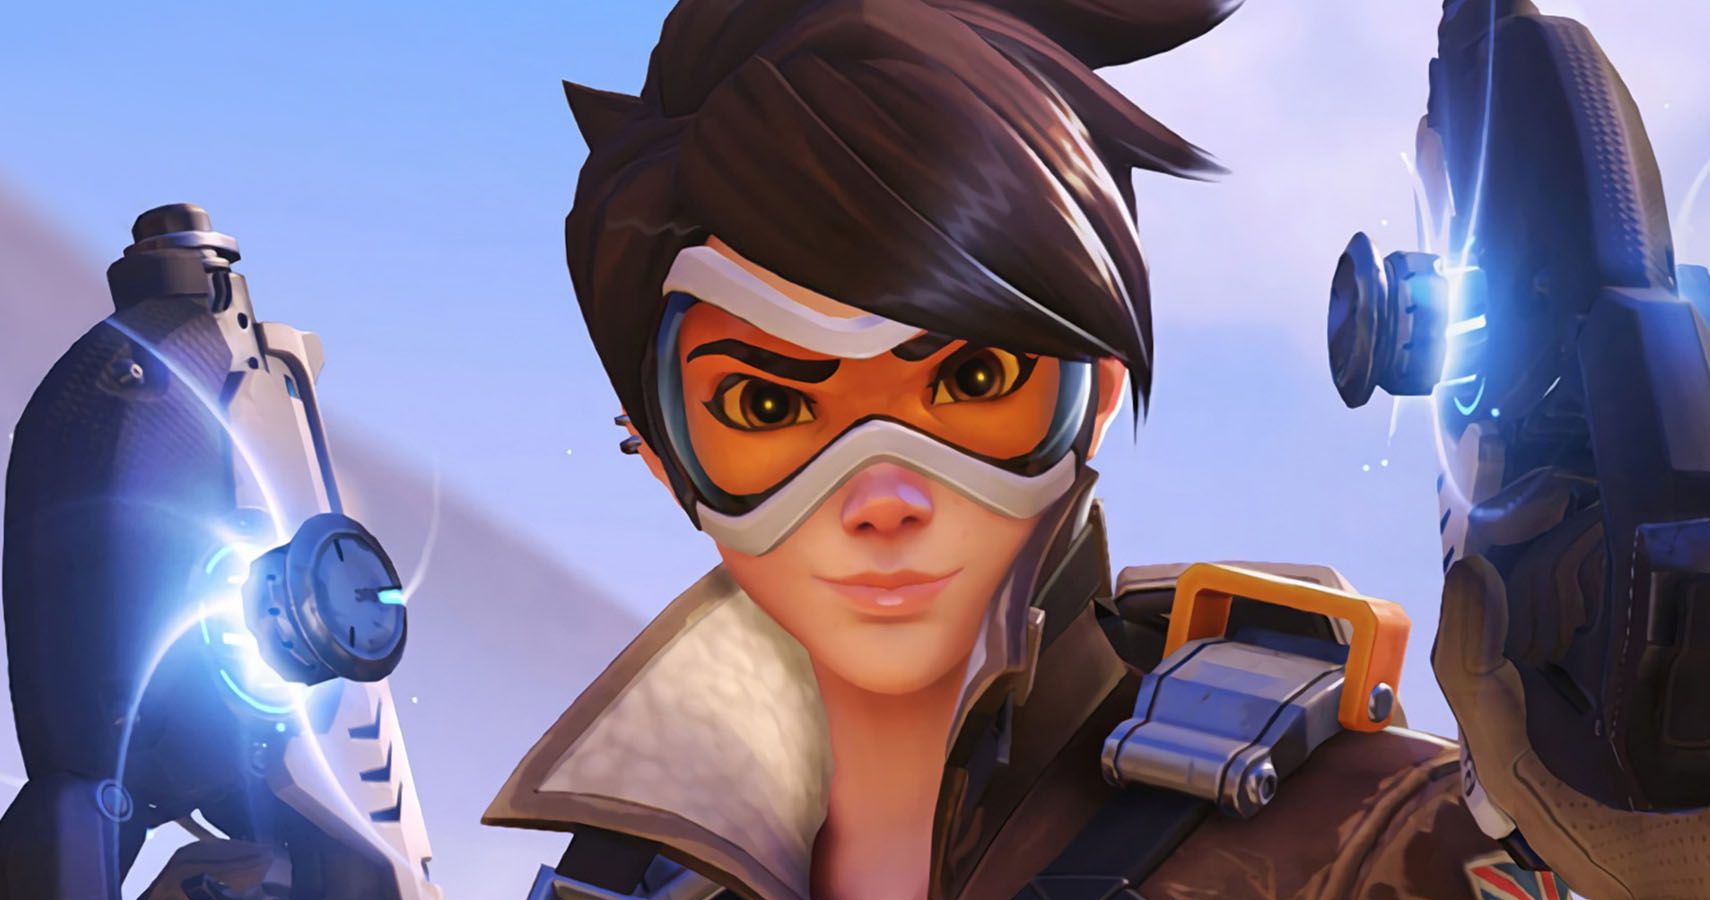 Overwatch: 10 Things About Tracer You Didn't Know